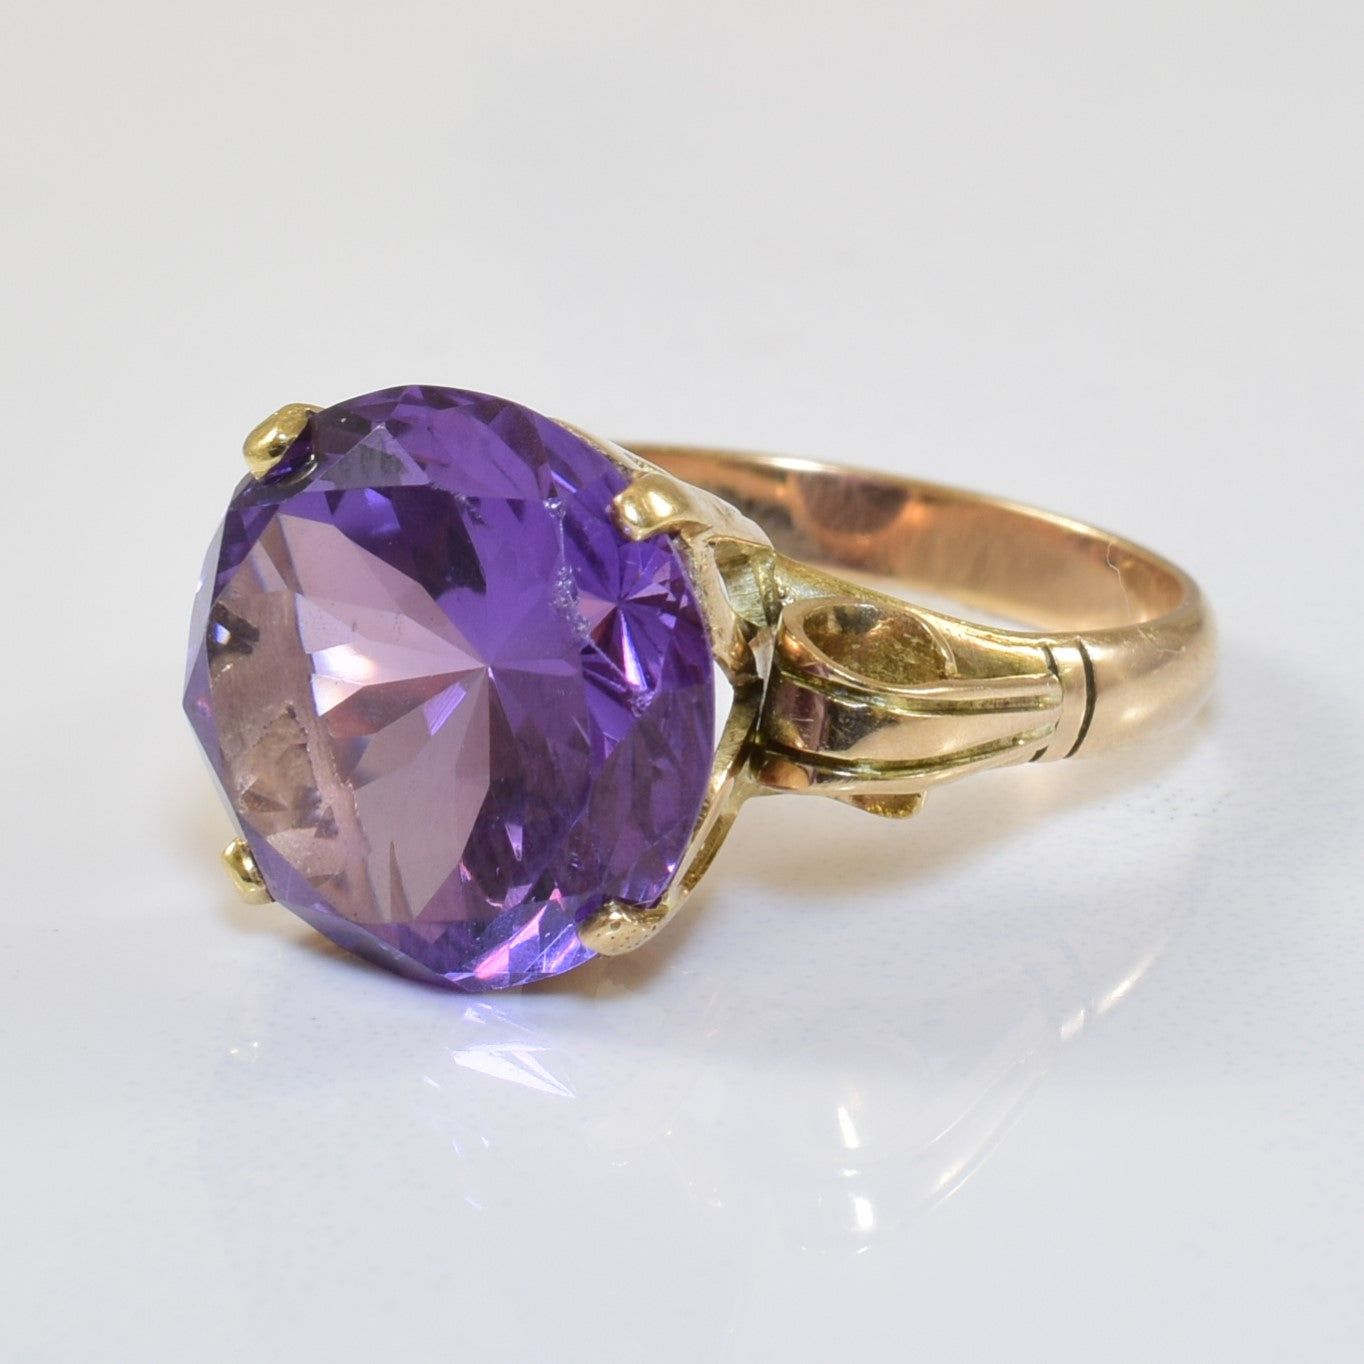 Synthetic Purple Sapphire Ring | 12.50ct | SZ 8.25 |